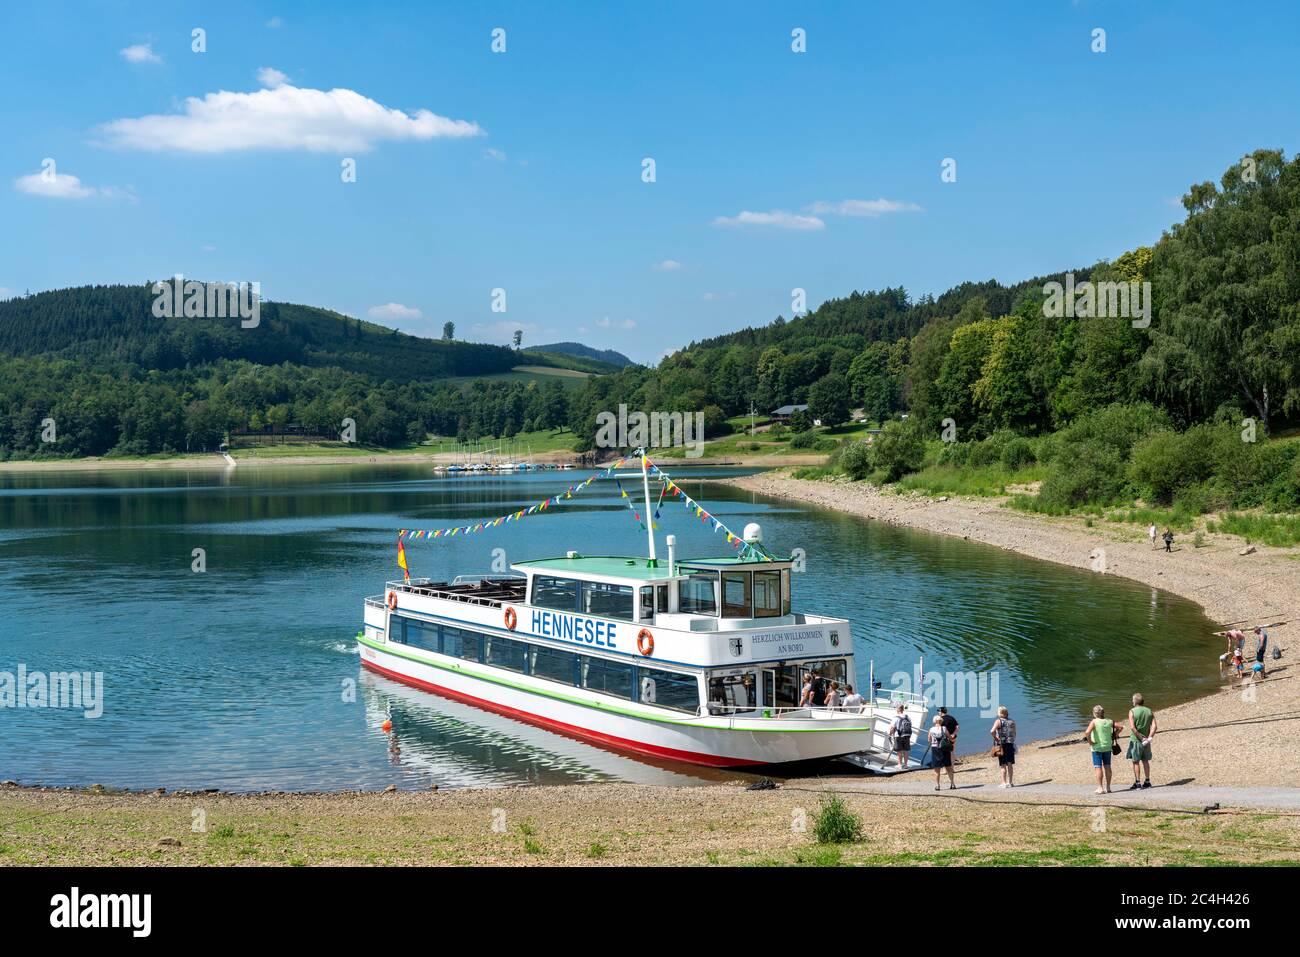 Hennesee High Resolution Stock Photography and Images - Alamy